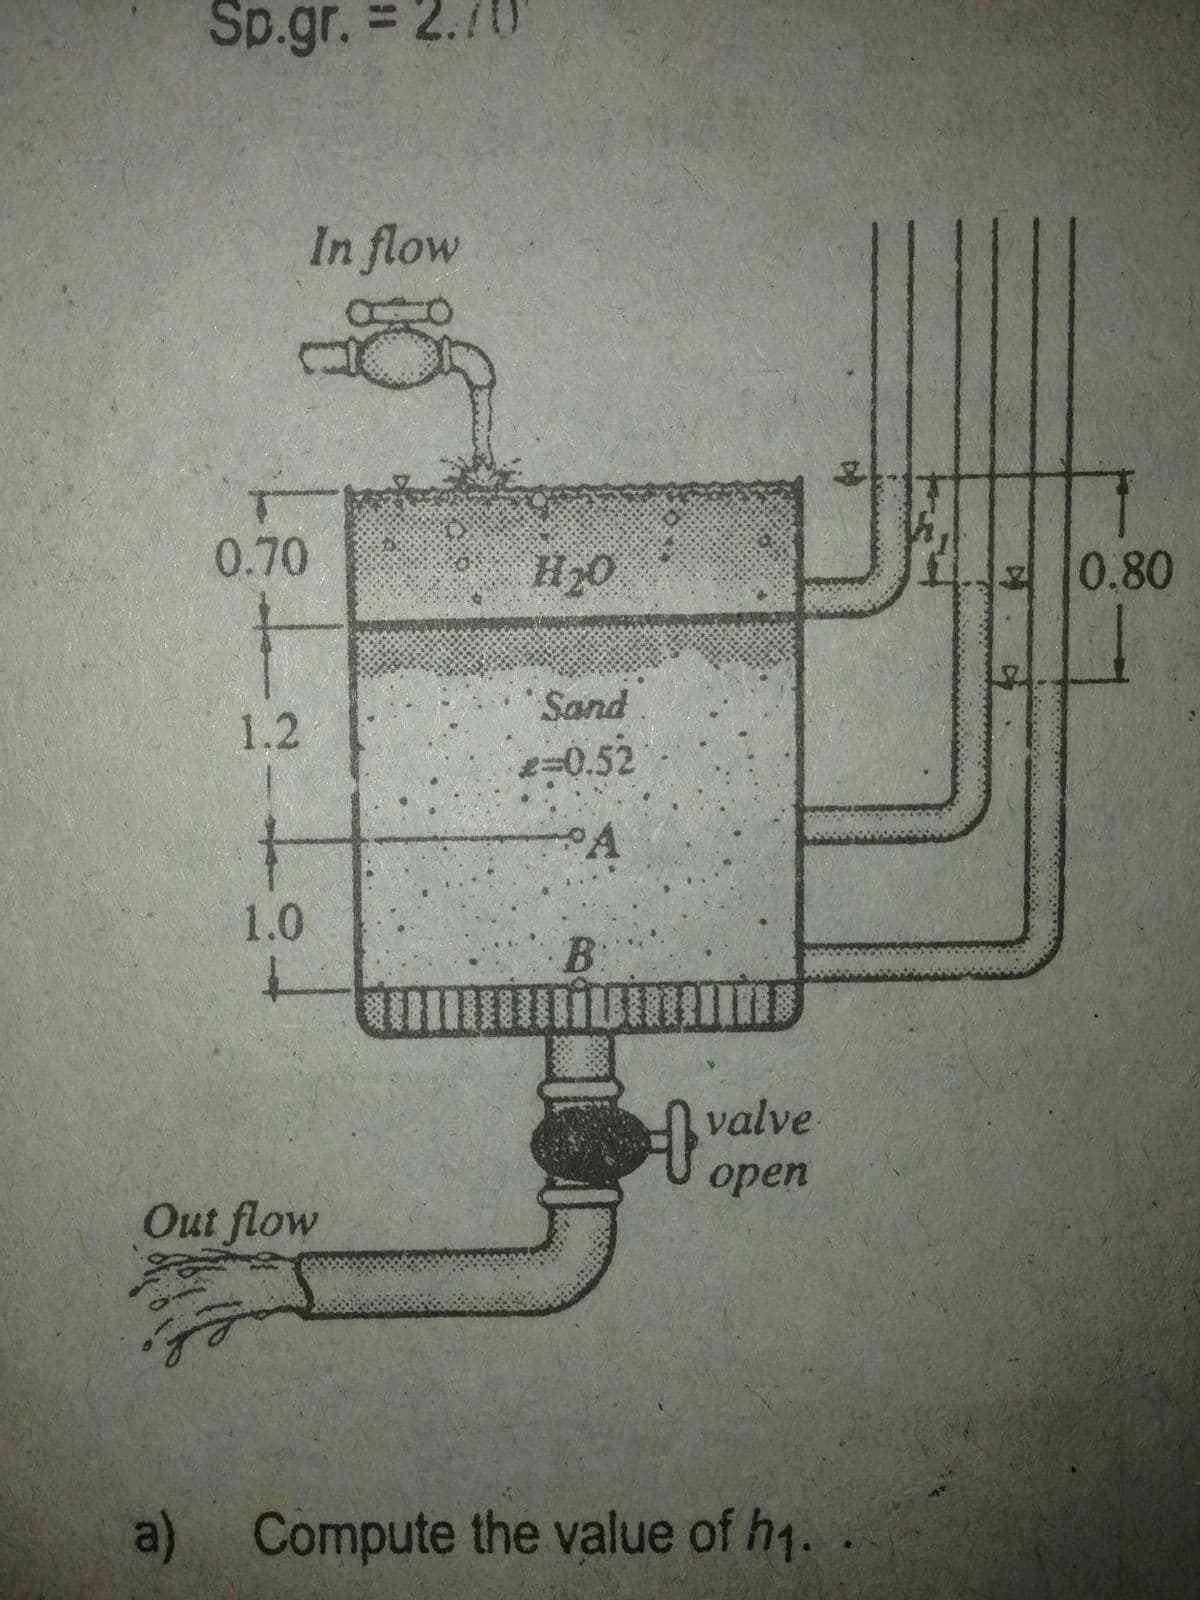 Sp.gr. = 2.70
In flow
0.70
H20
0.80
Sand
1.2
230.52
1.0
B.
valve
оpen
Out flow
a) Compute the value of h1.
